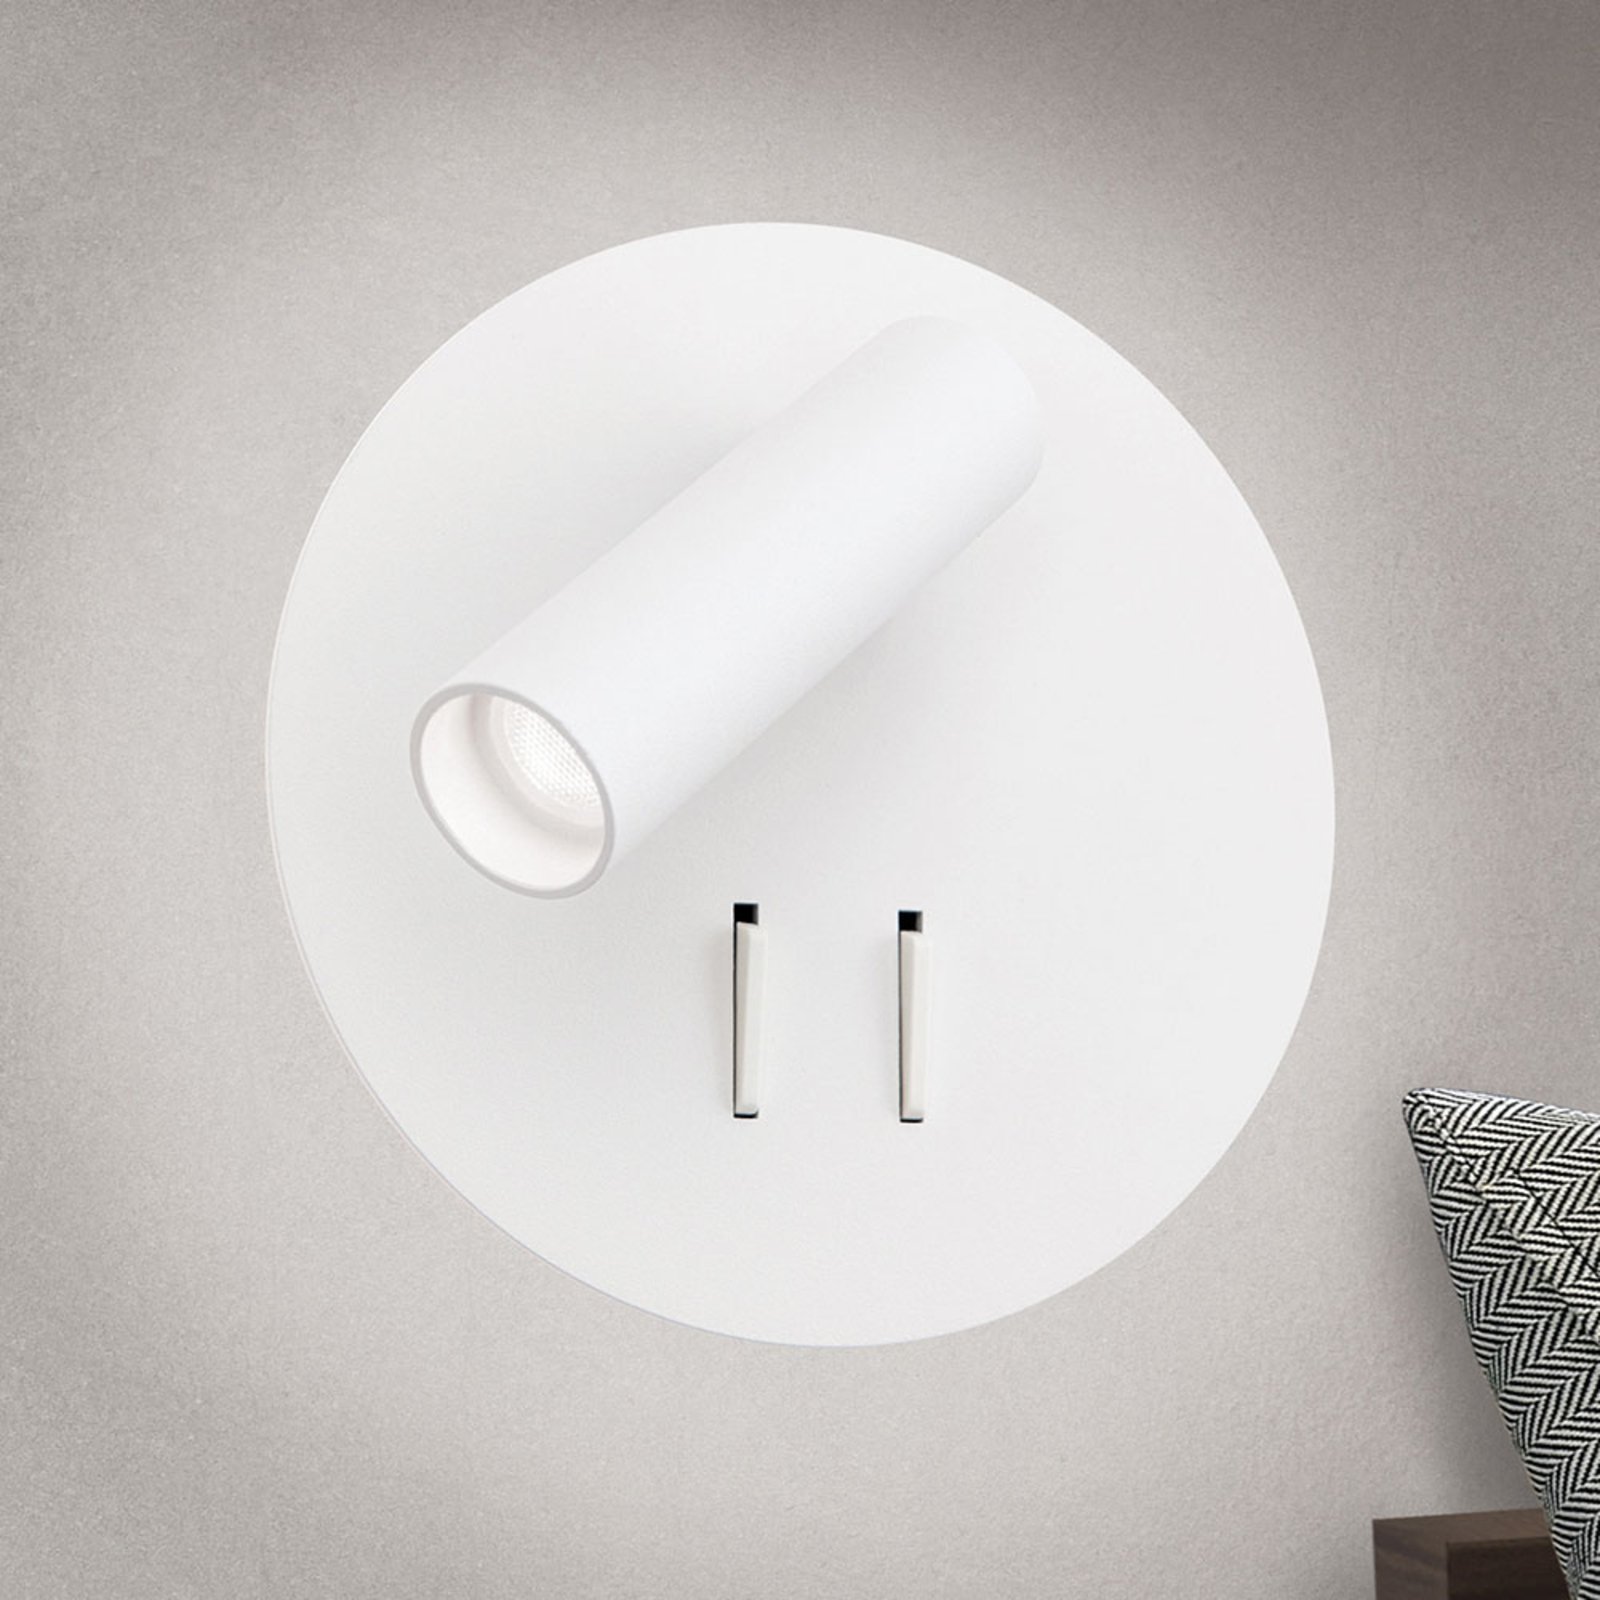 Lenny LED wall light with 2 light sources, white